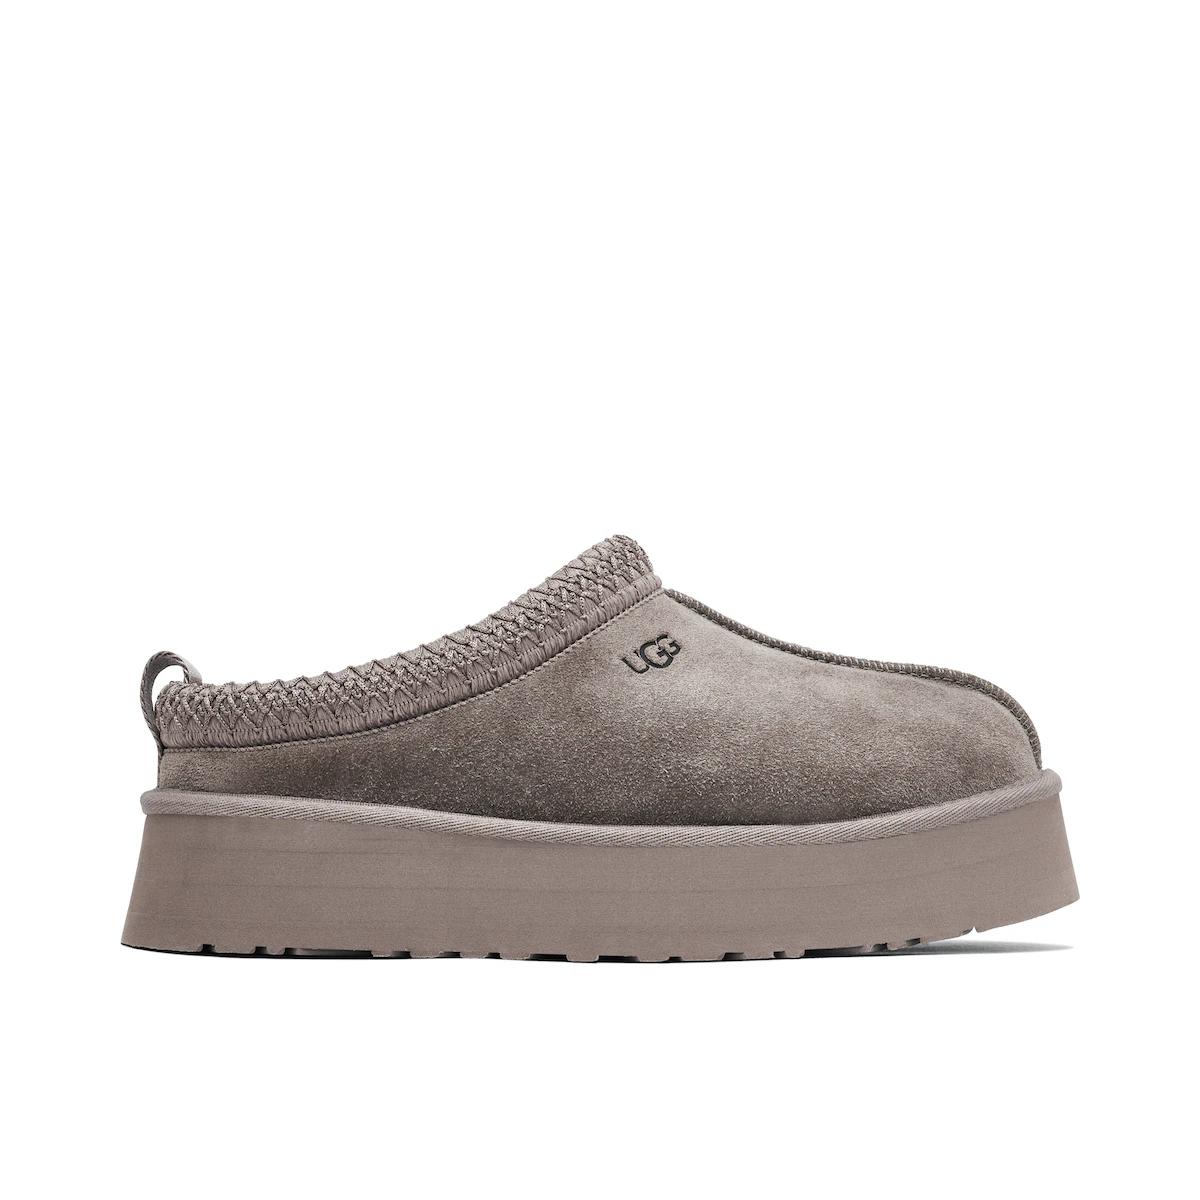 ugg tazz smoked plume - What is the difference between UGG Tazz and Tasman